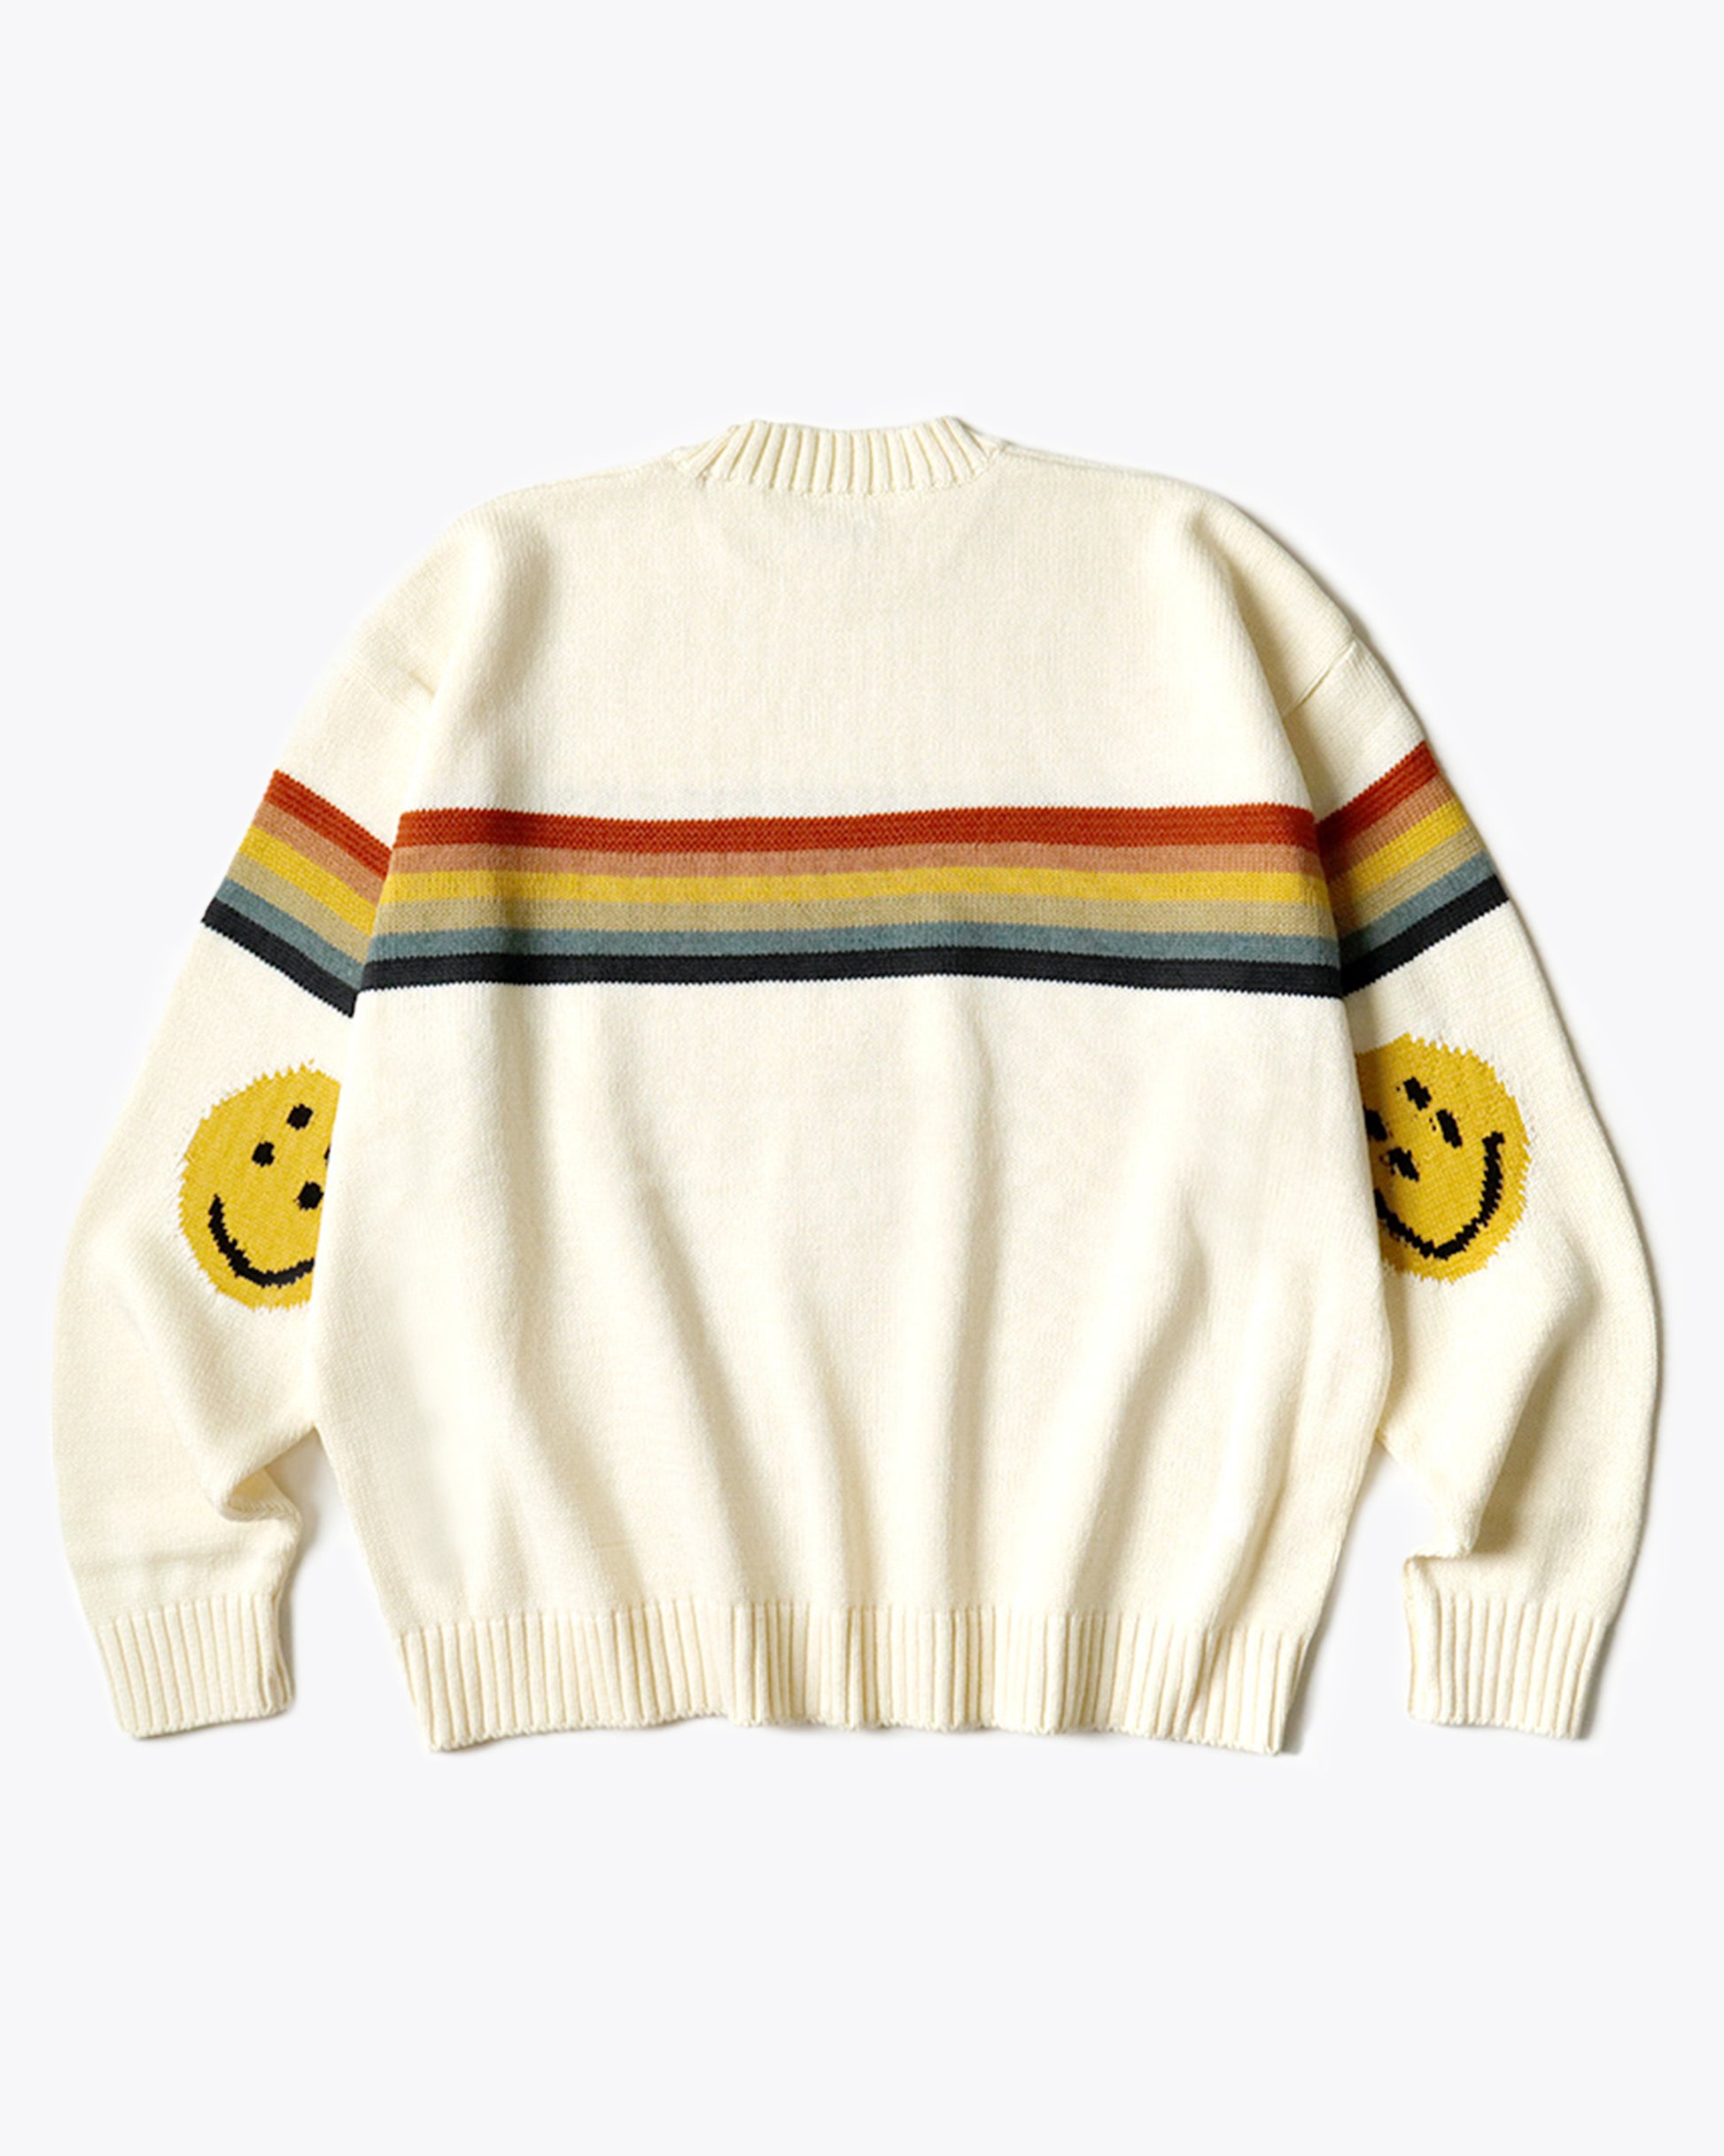 A 5g knit crewneck sweater with a rainbow stripe and smiley elbow patche